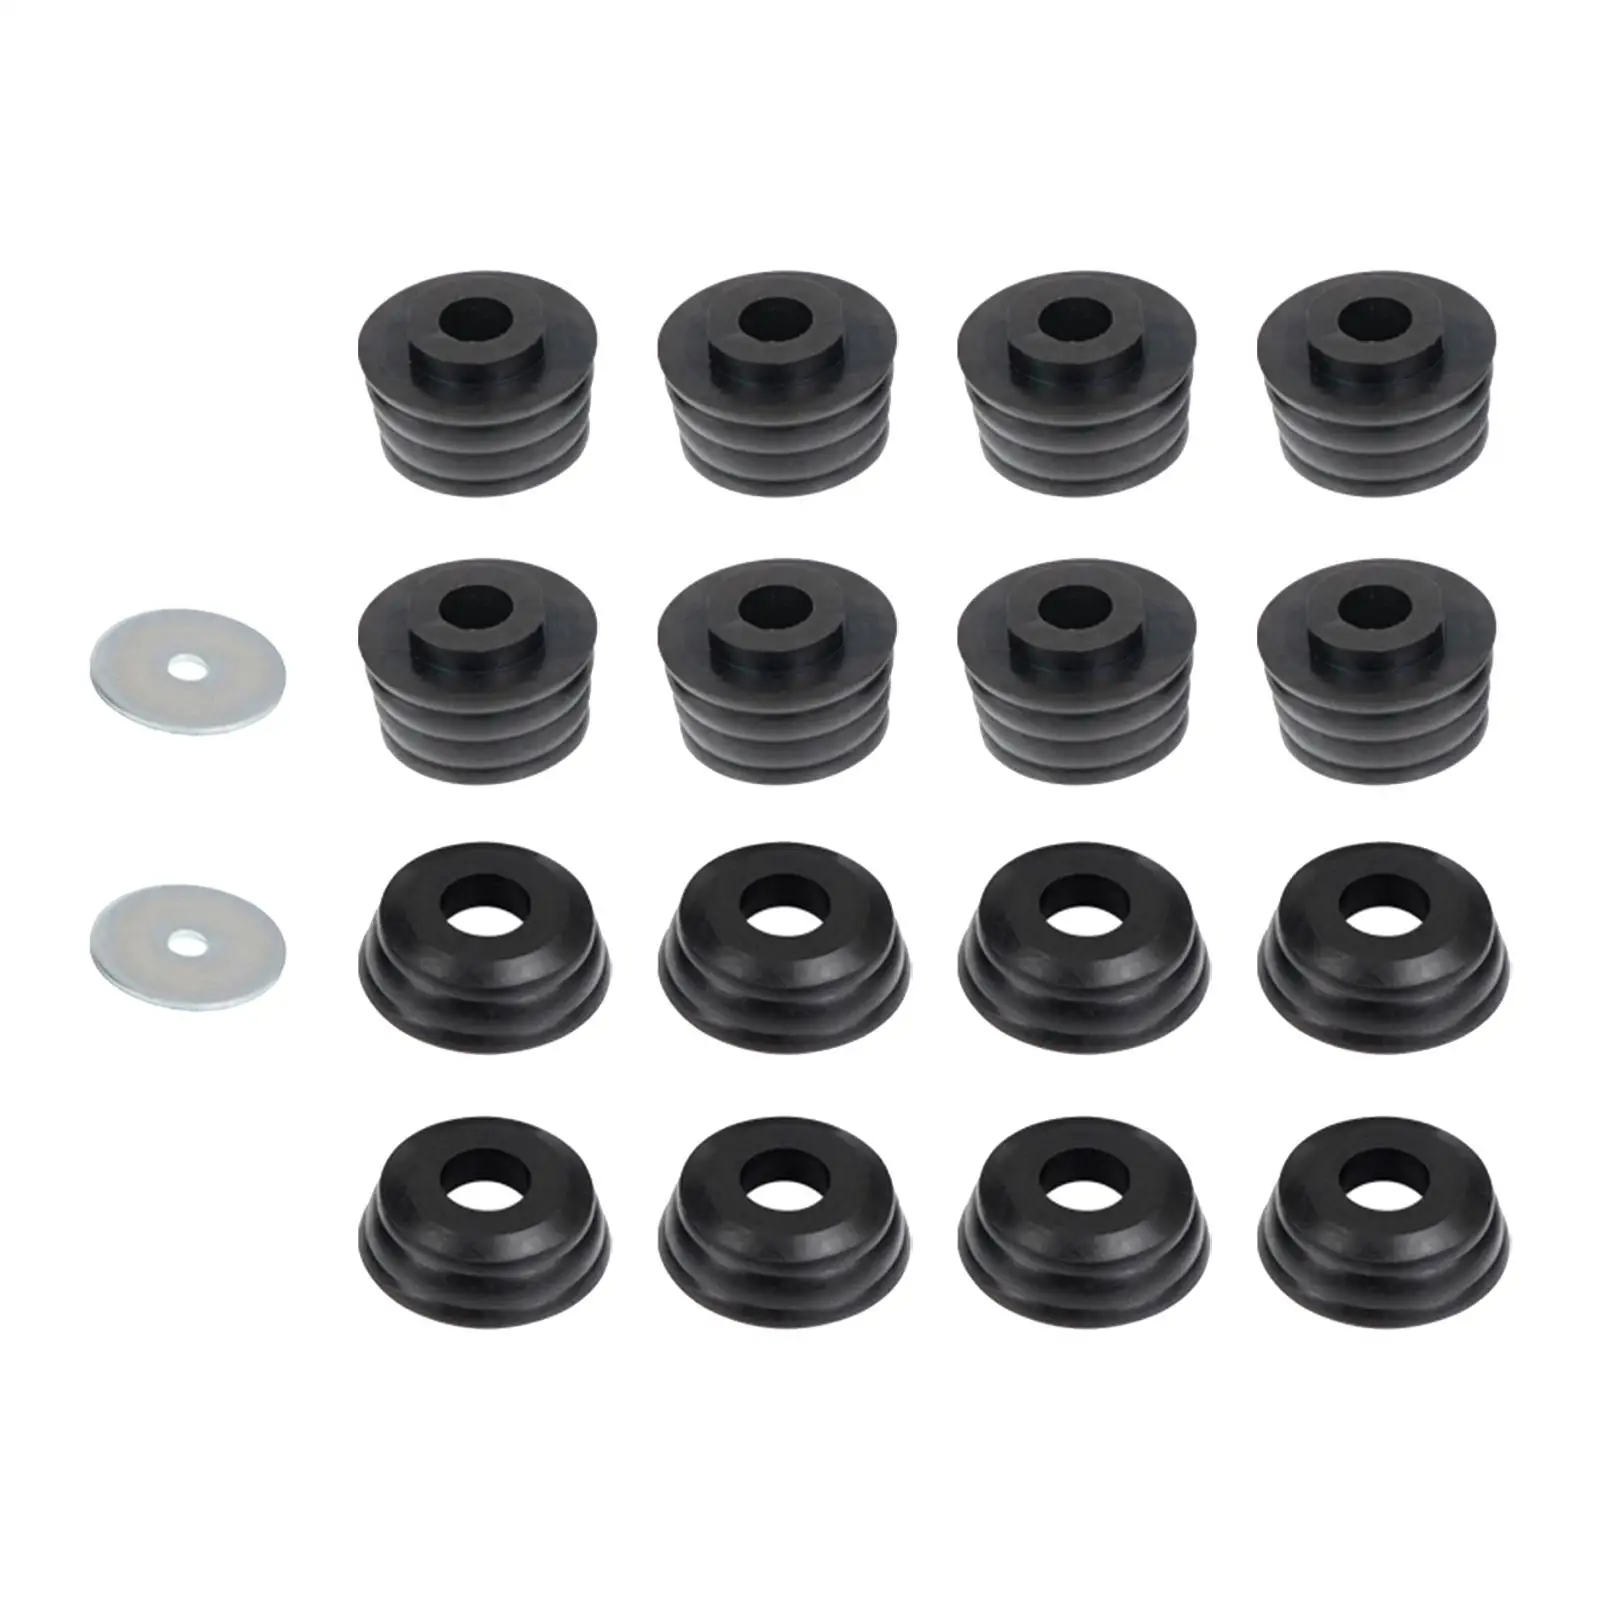 Body Cab Bushing Kit Repair Parts Replacement Black Body Cab Mounts Washers for Chevy Silverado 1999-2014 1500 2500 2WD 4WD